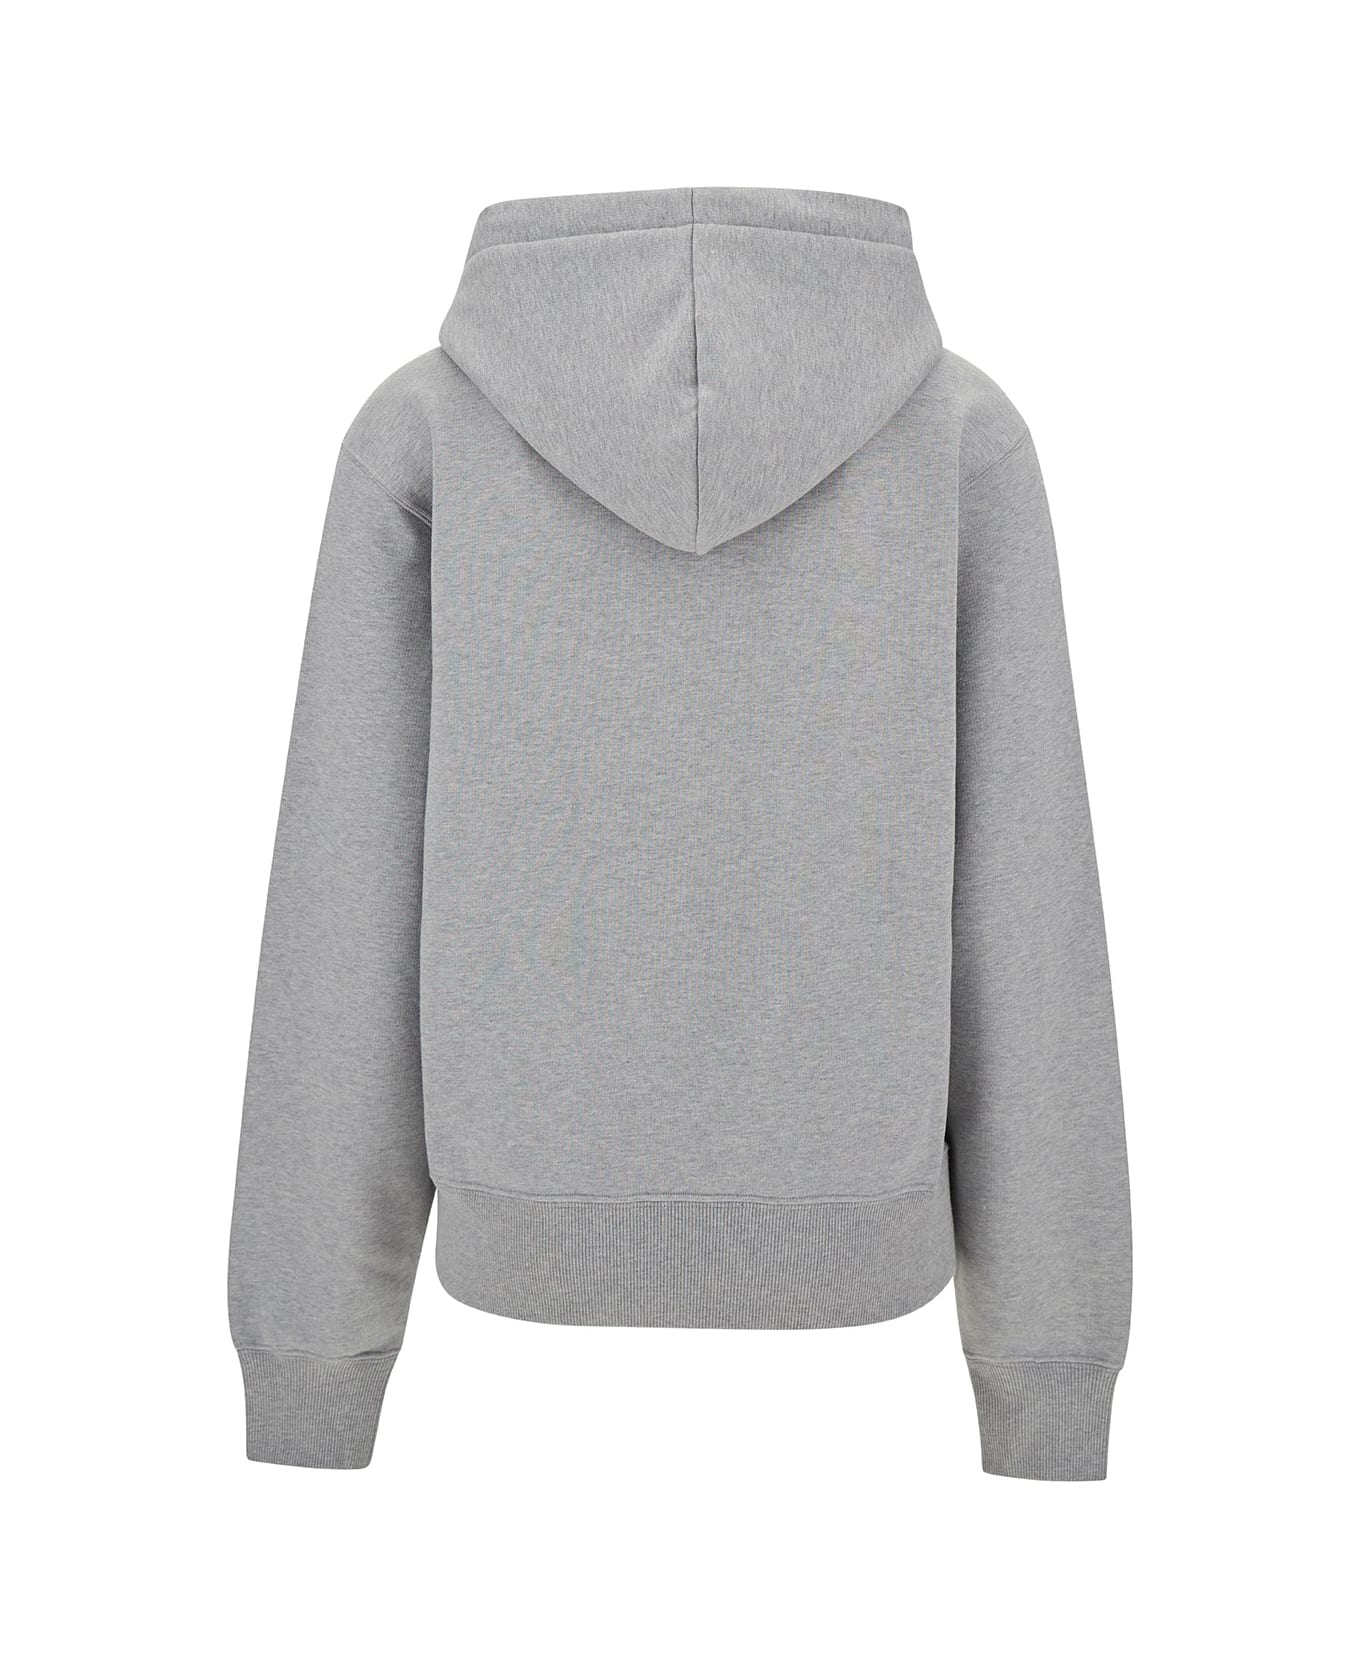 Saint Laurent Grey Hoodie With Cassandre Embroidery In Cotton Woman - Grey